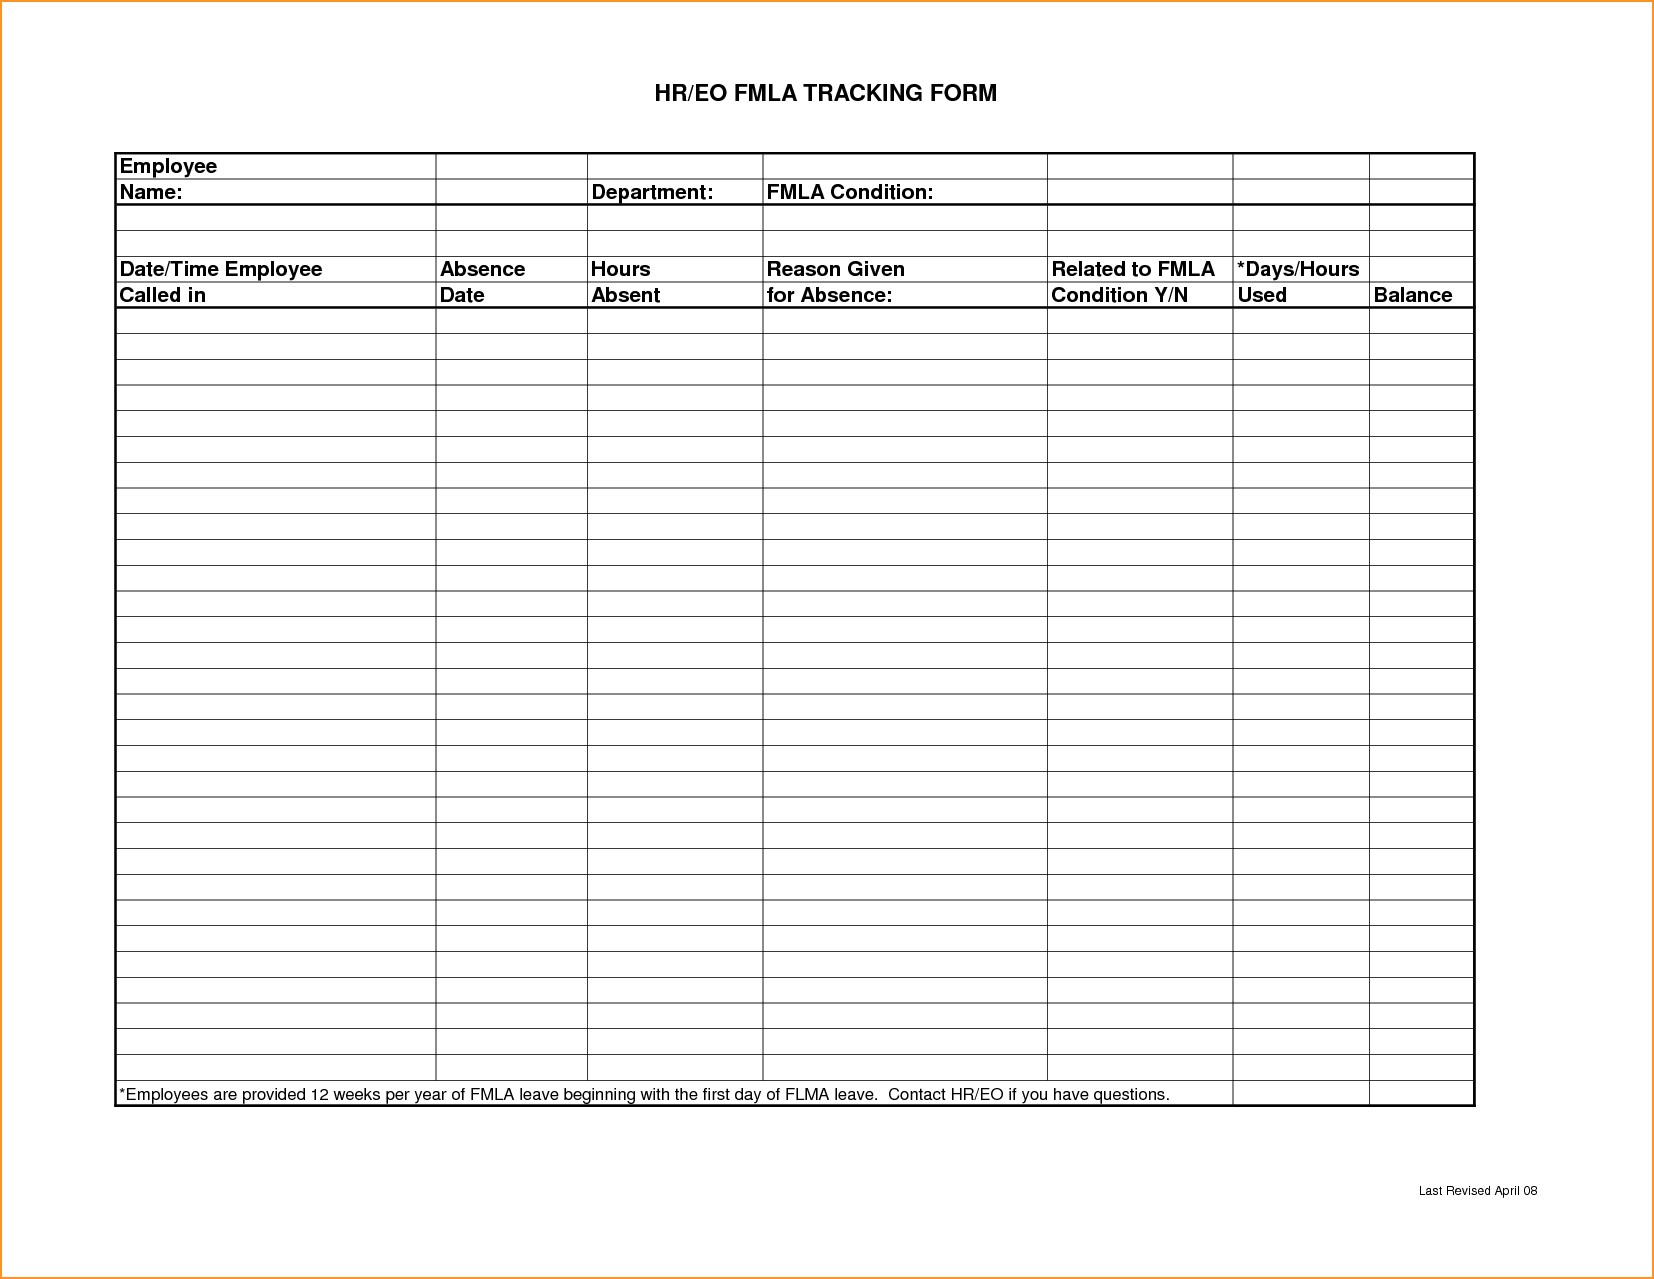 Free Business Expense Tracker Template And Small Document